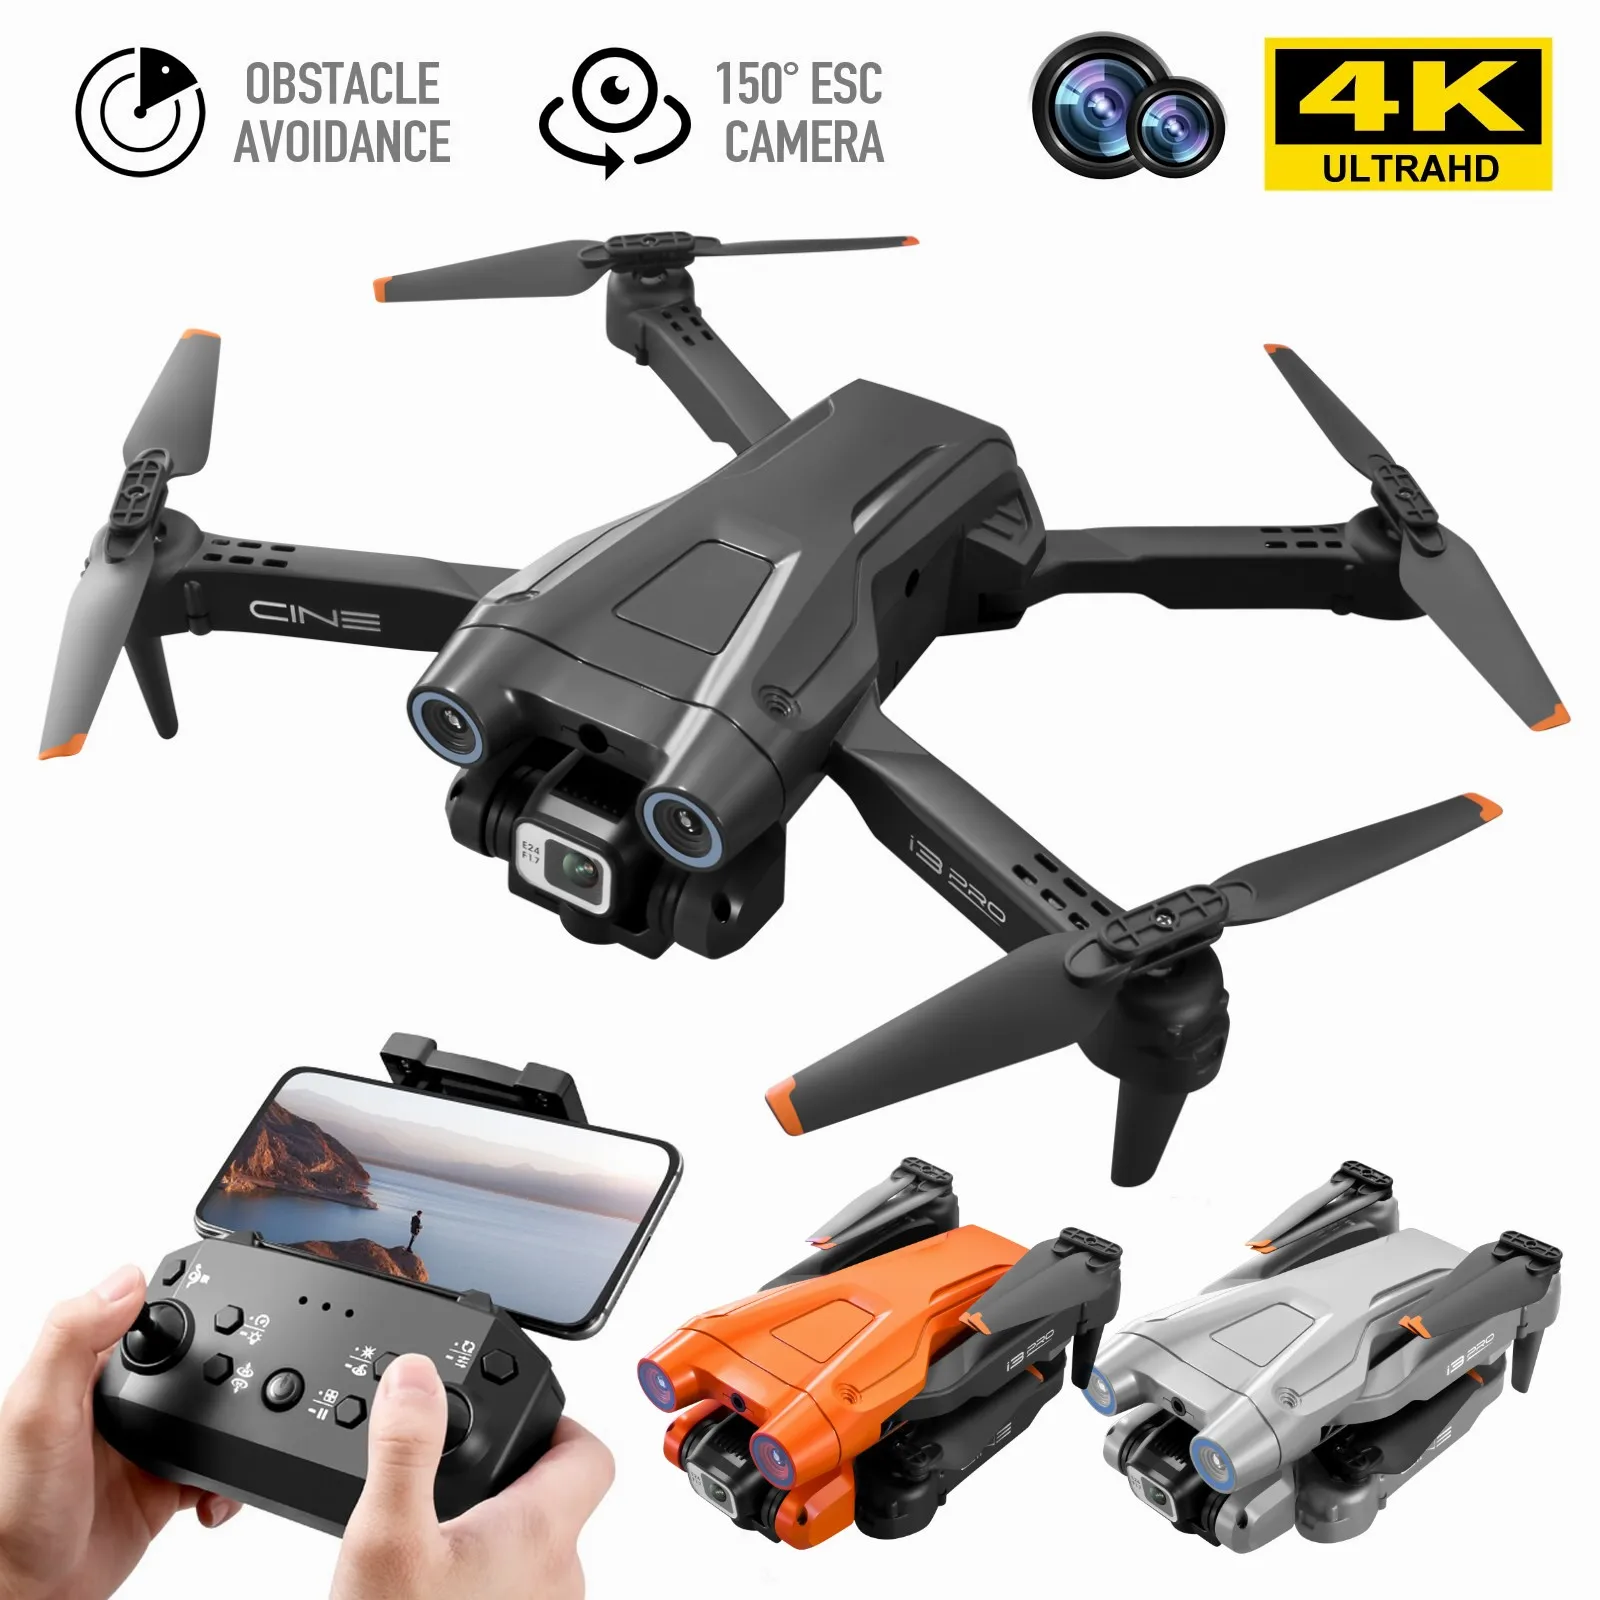 

i3 PRO RC Drone 4K HD Camera GPS 5G WIFI Wide Angle FPV Obstacle Avoidance Foldable Quadcopter Professional Drone Dron Gift Toys